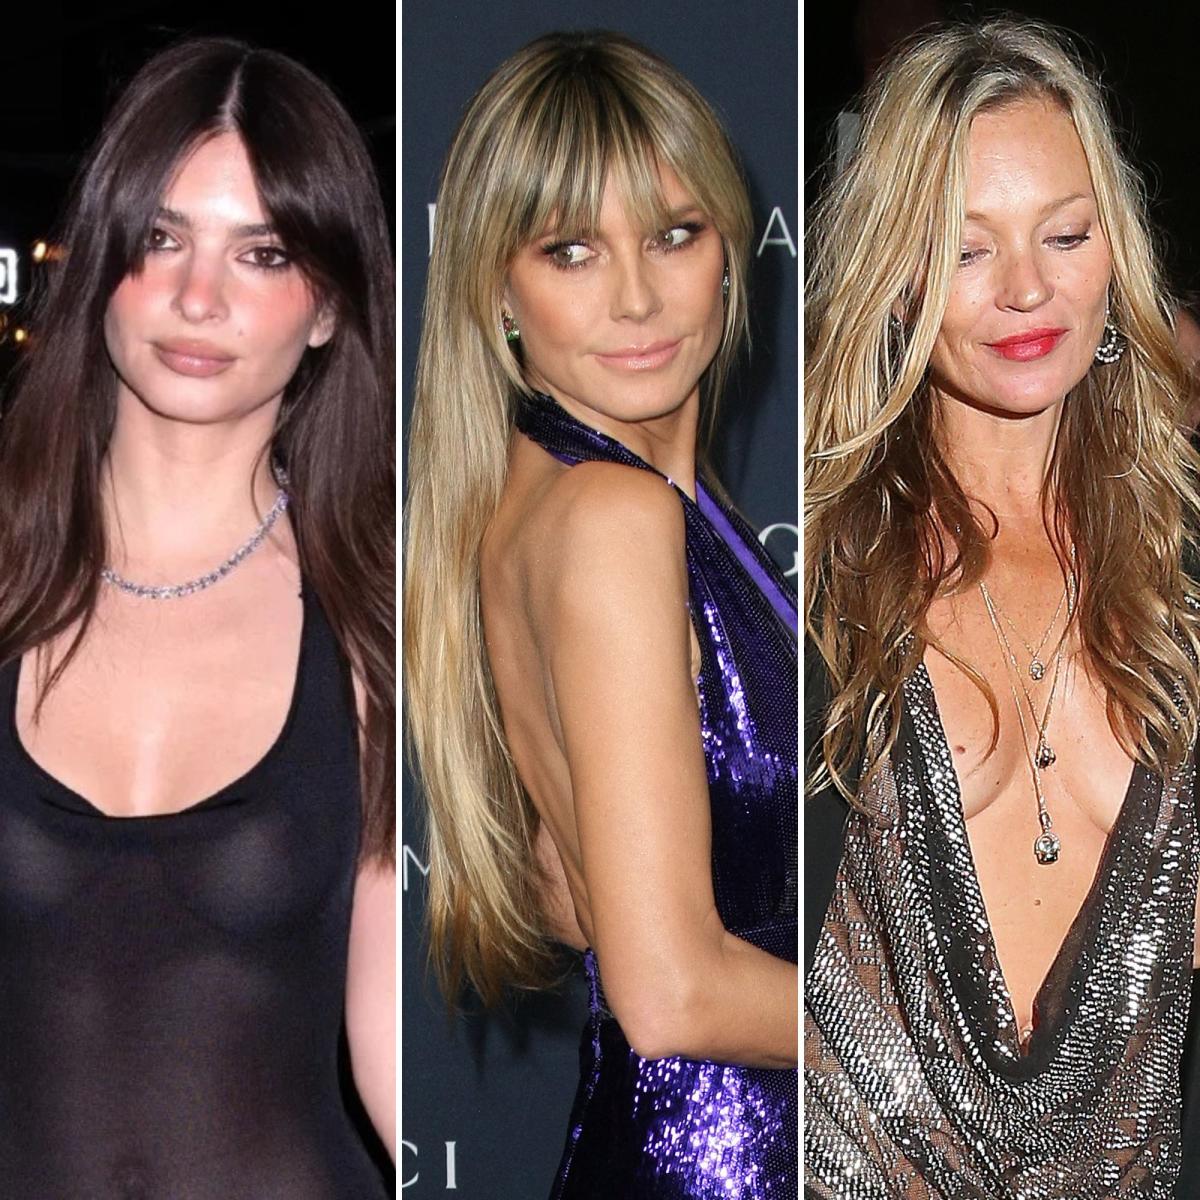 Celebrities' Most Revealing Nip Slips in Public: How They Handled